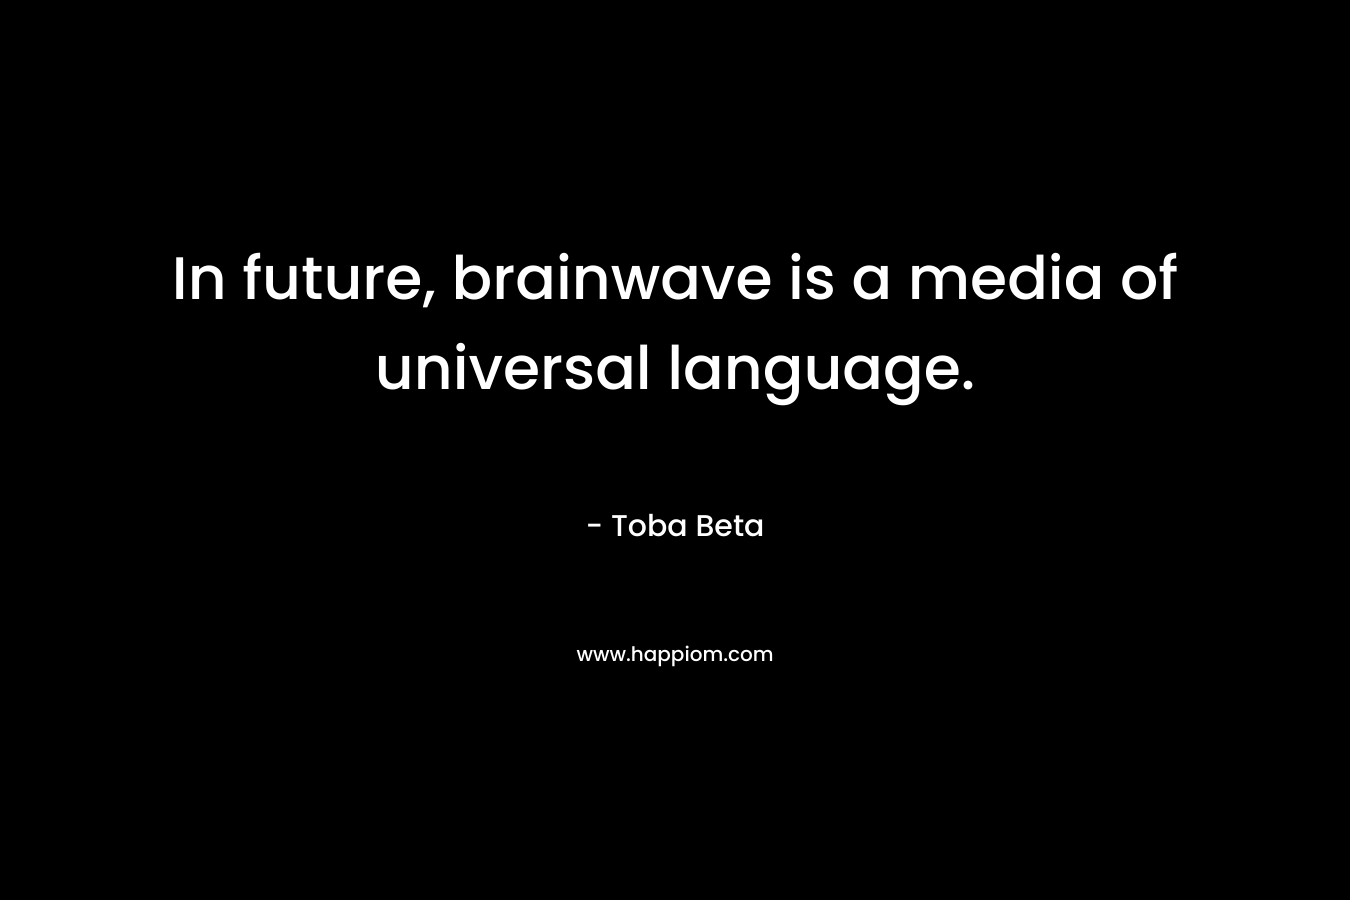 In future, brainwave is a media of universal language.